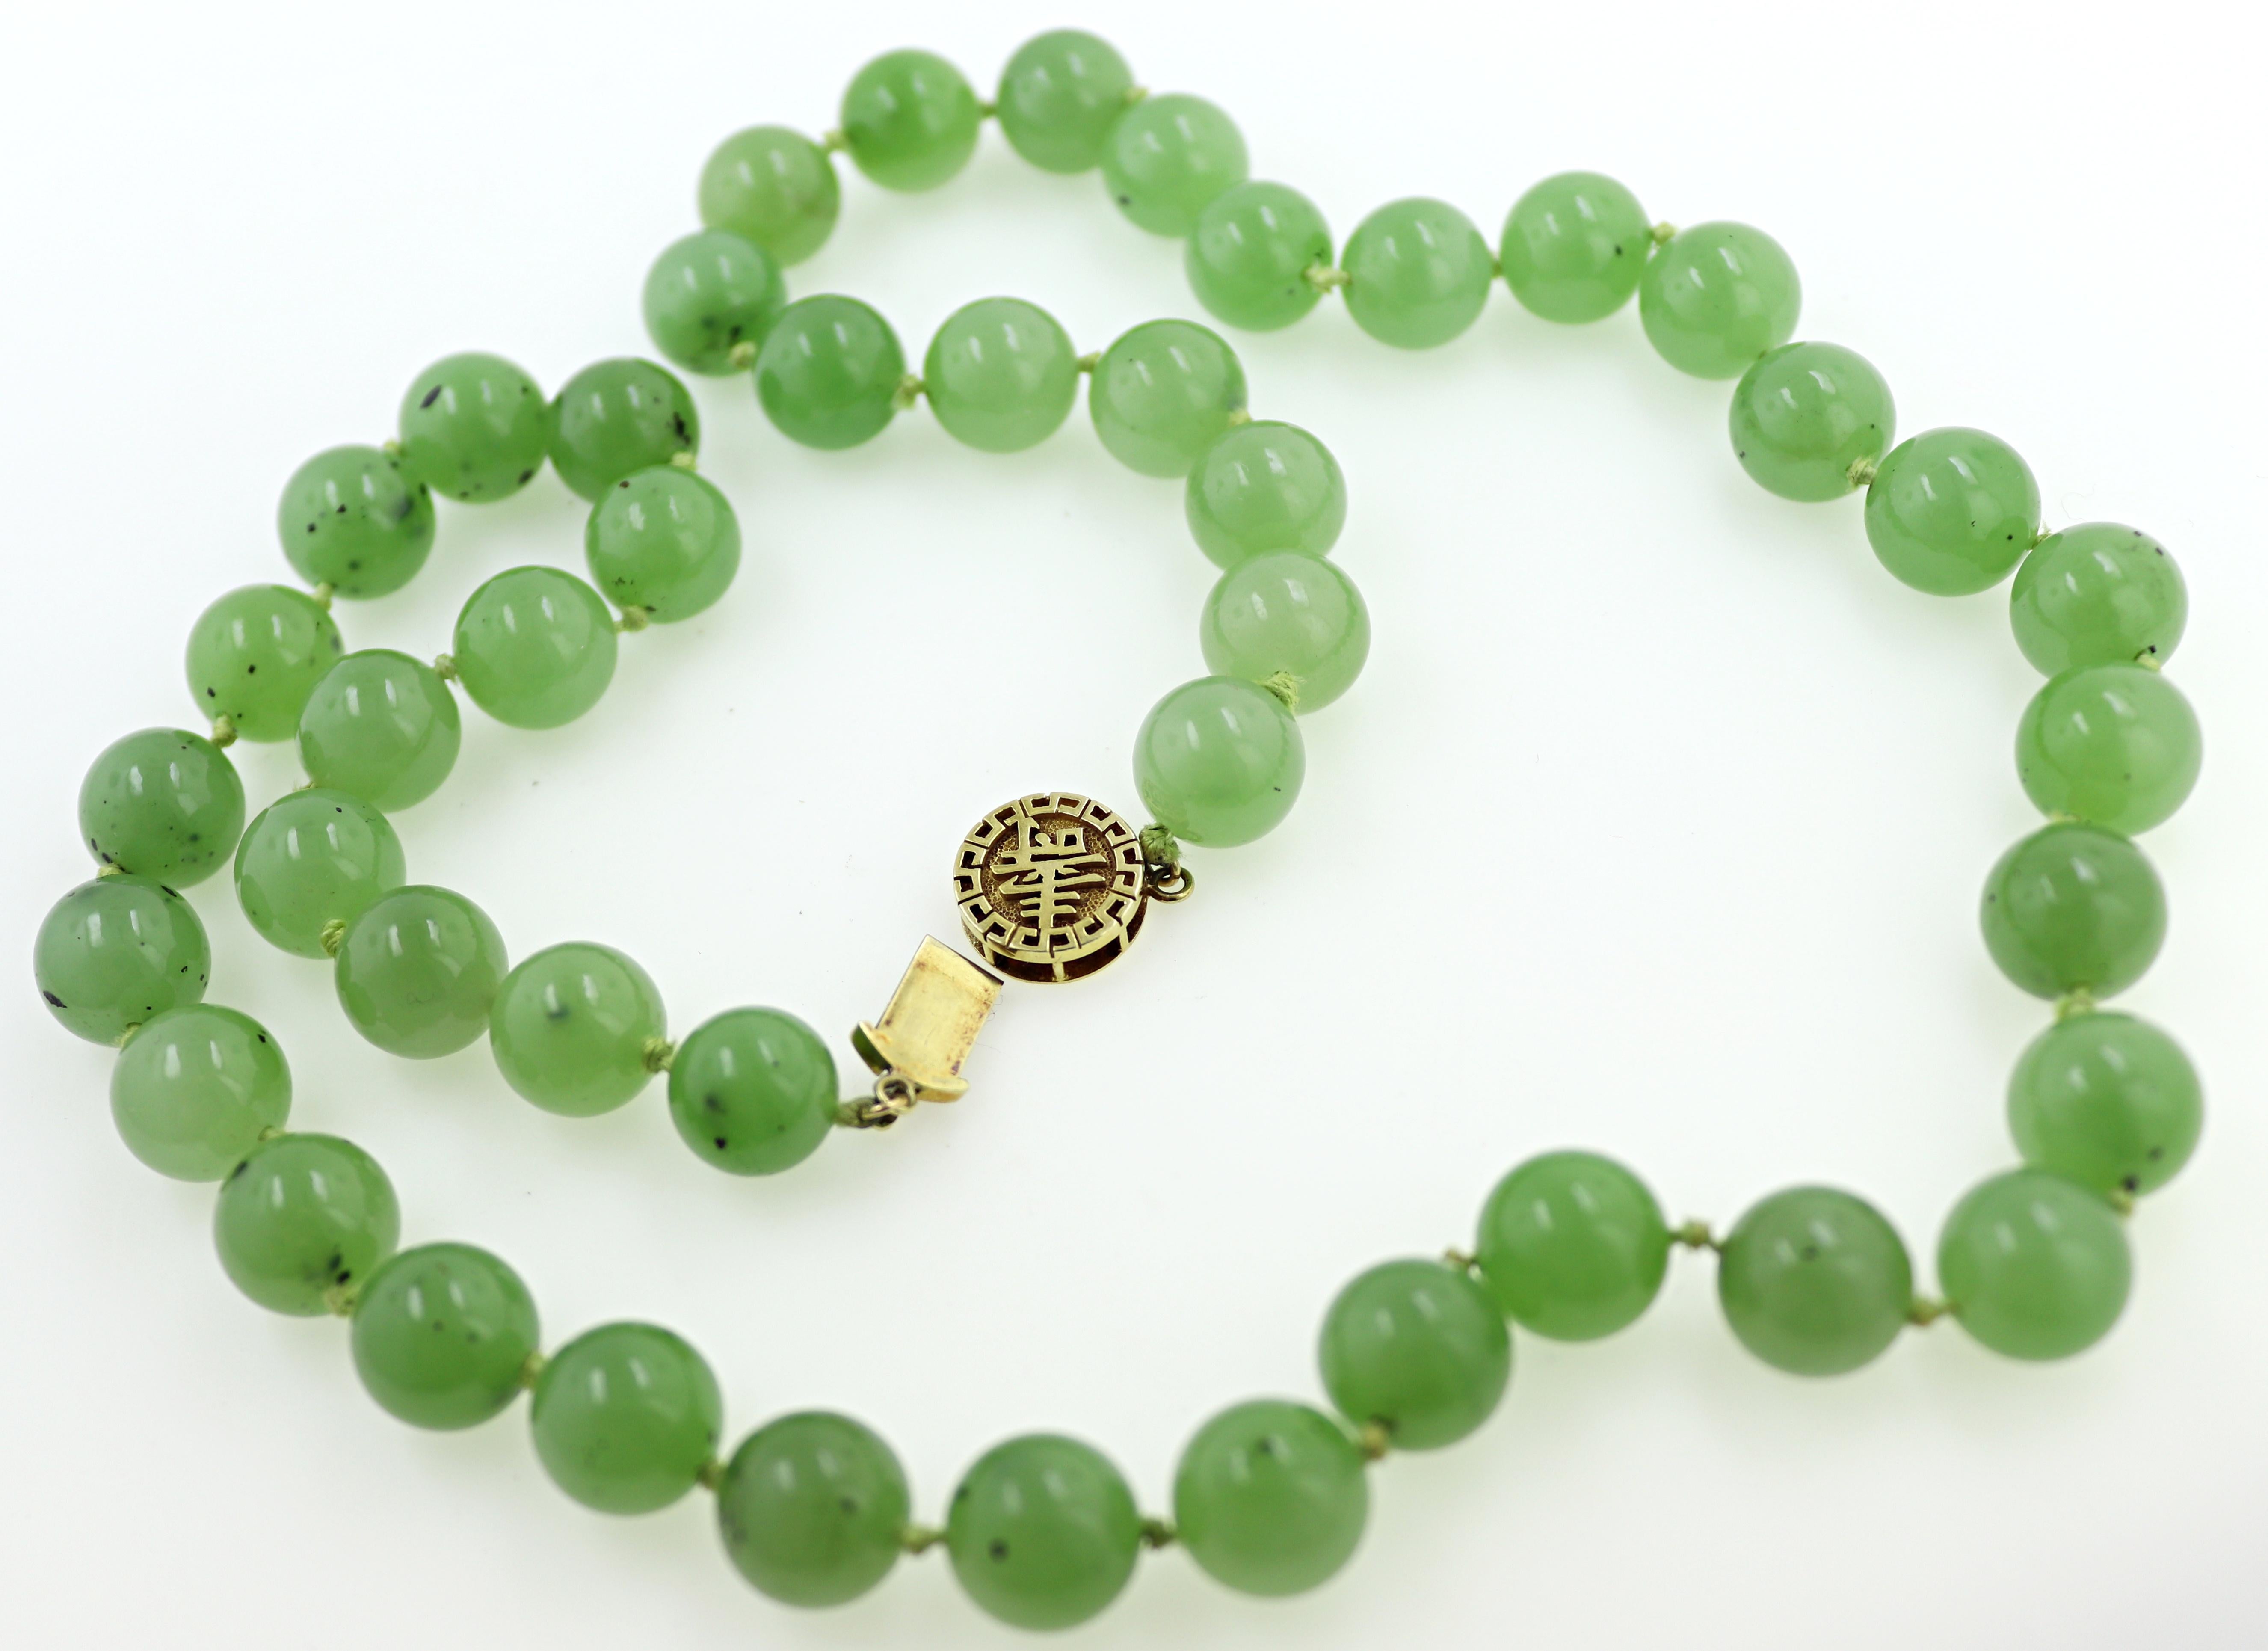 Siberian Nephrite Jade, 14k Gold Necklace, Bracelet and Earrings Jewelry Suite For Sale 4